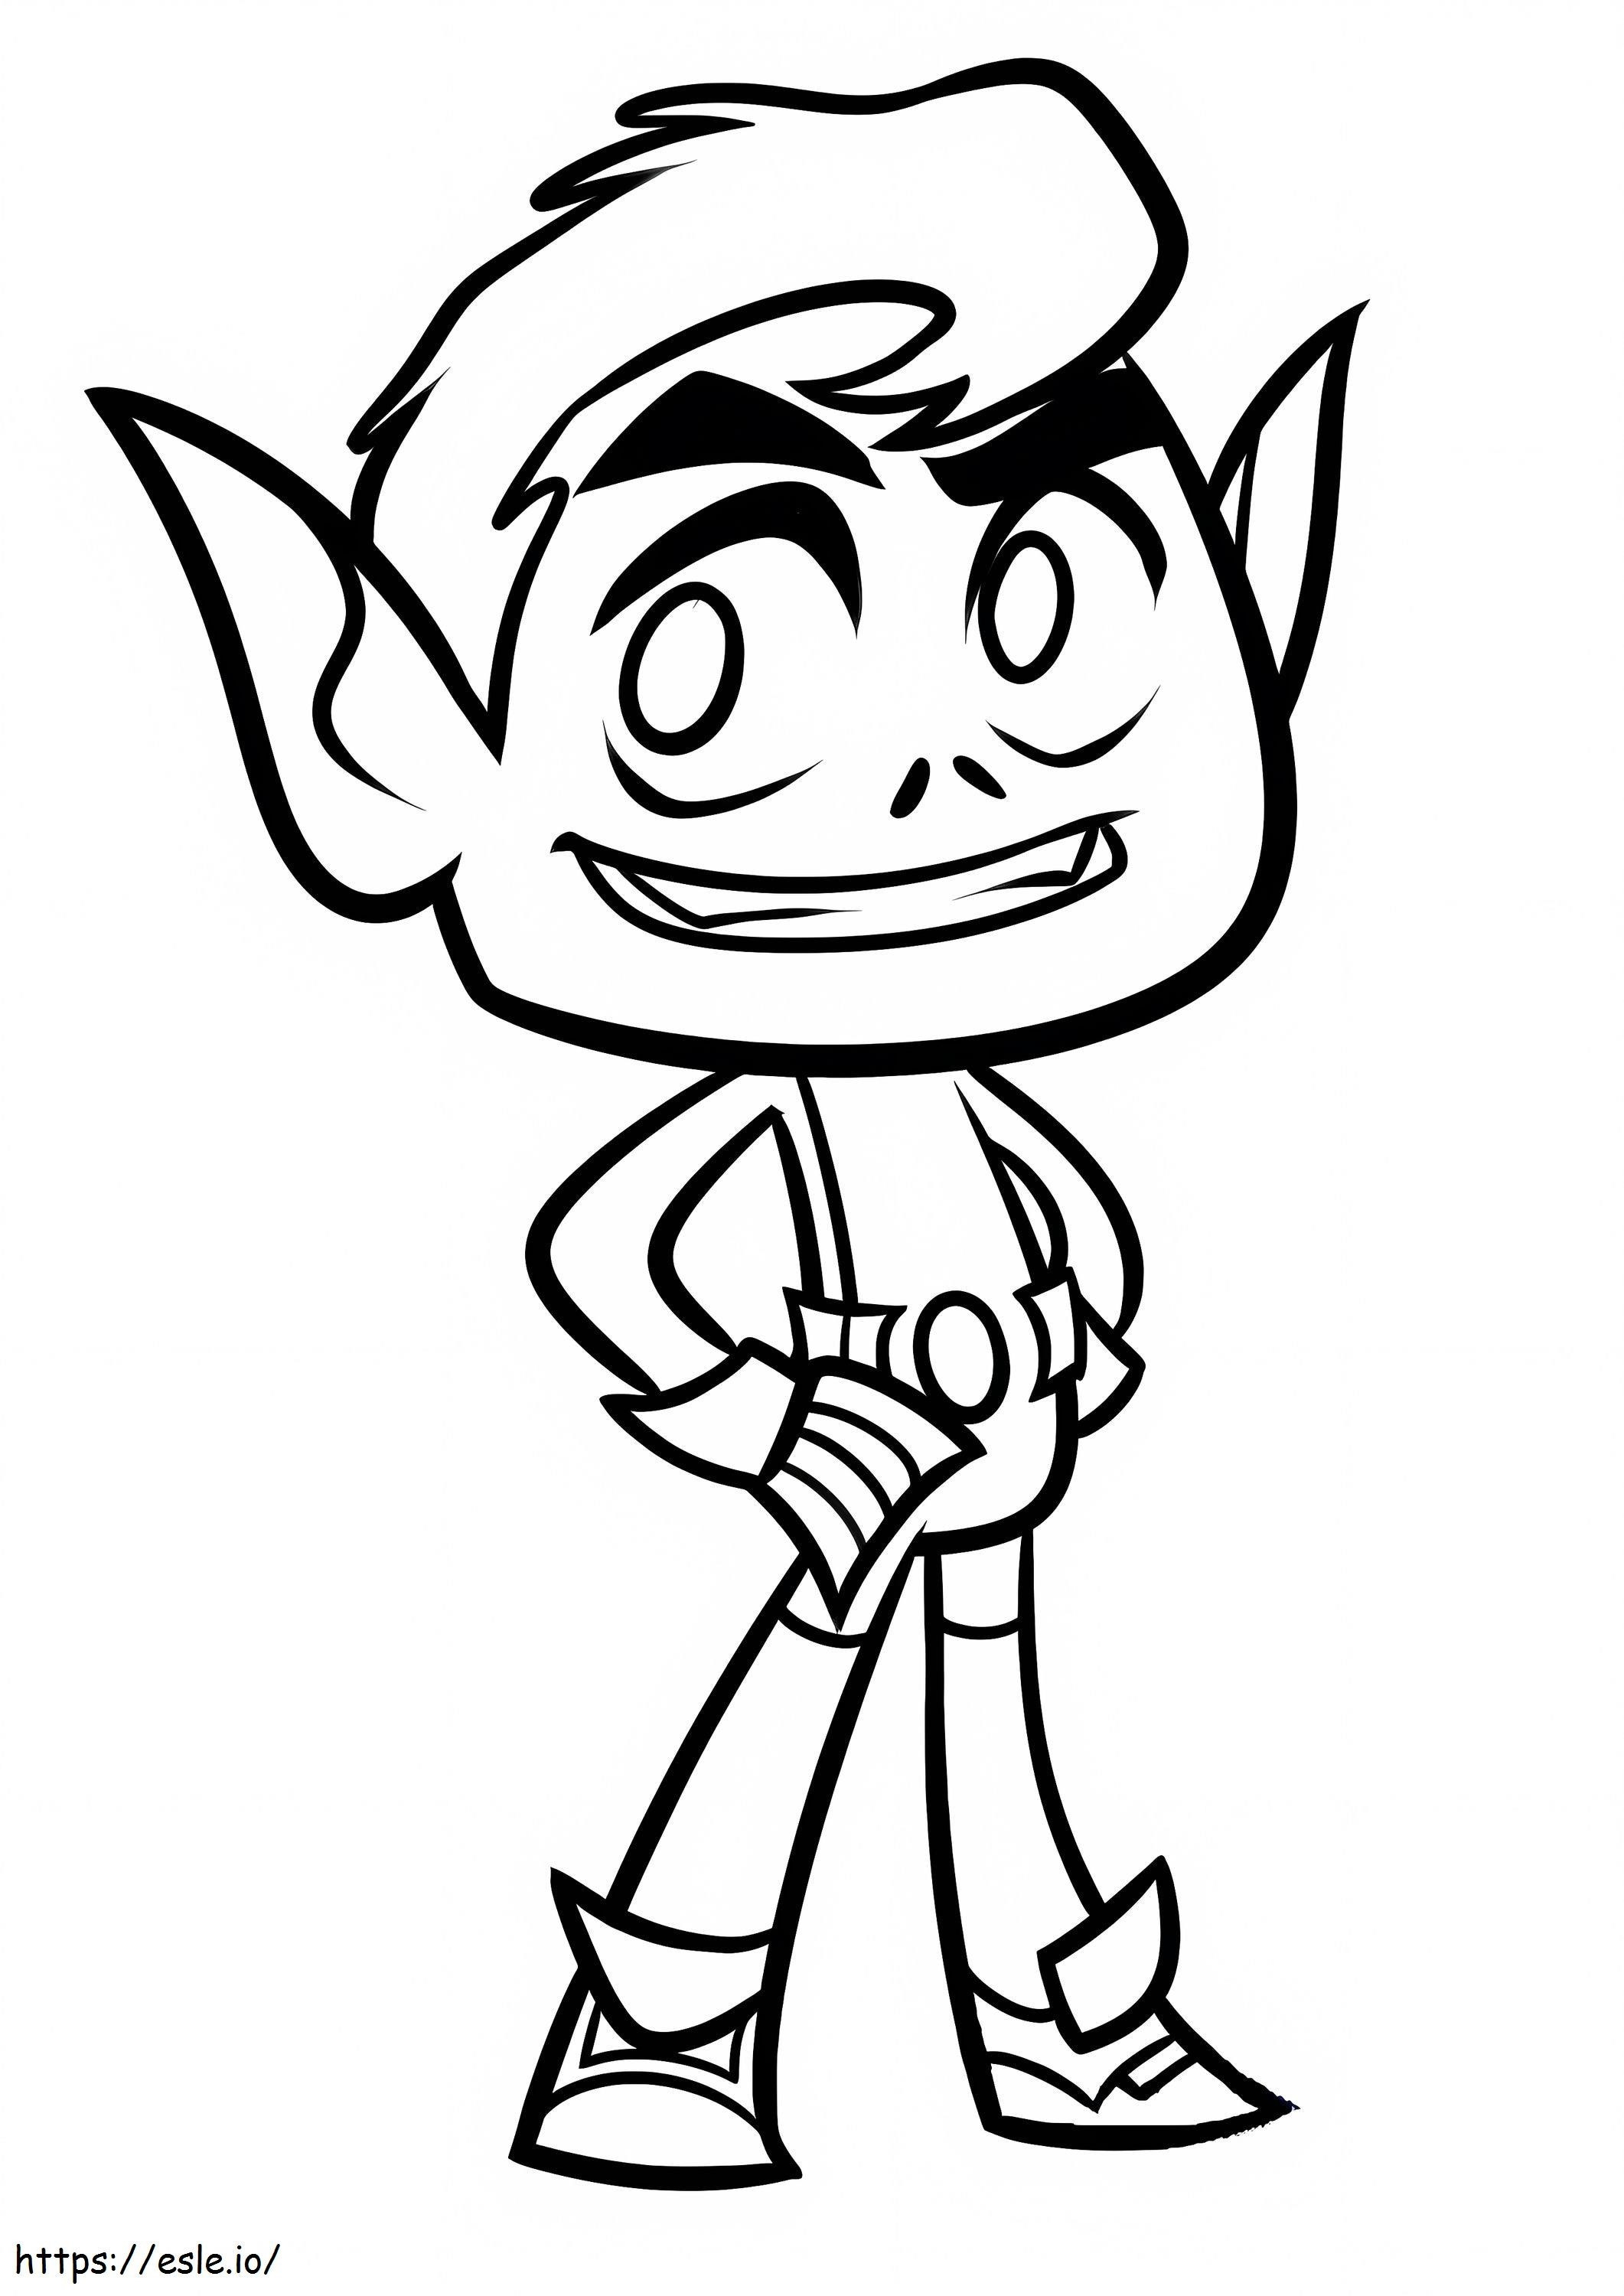 1528101132 Cute Teen Titans Go coloring page